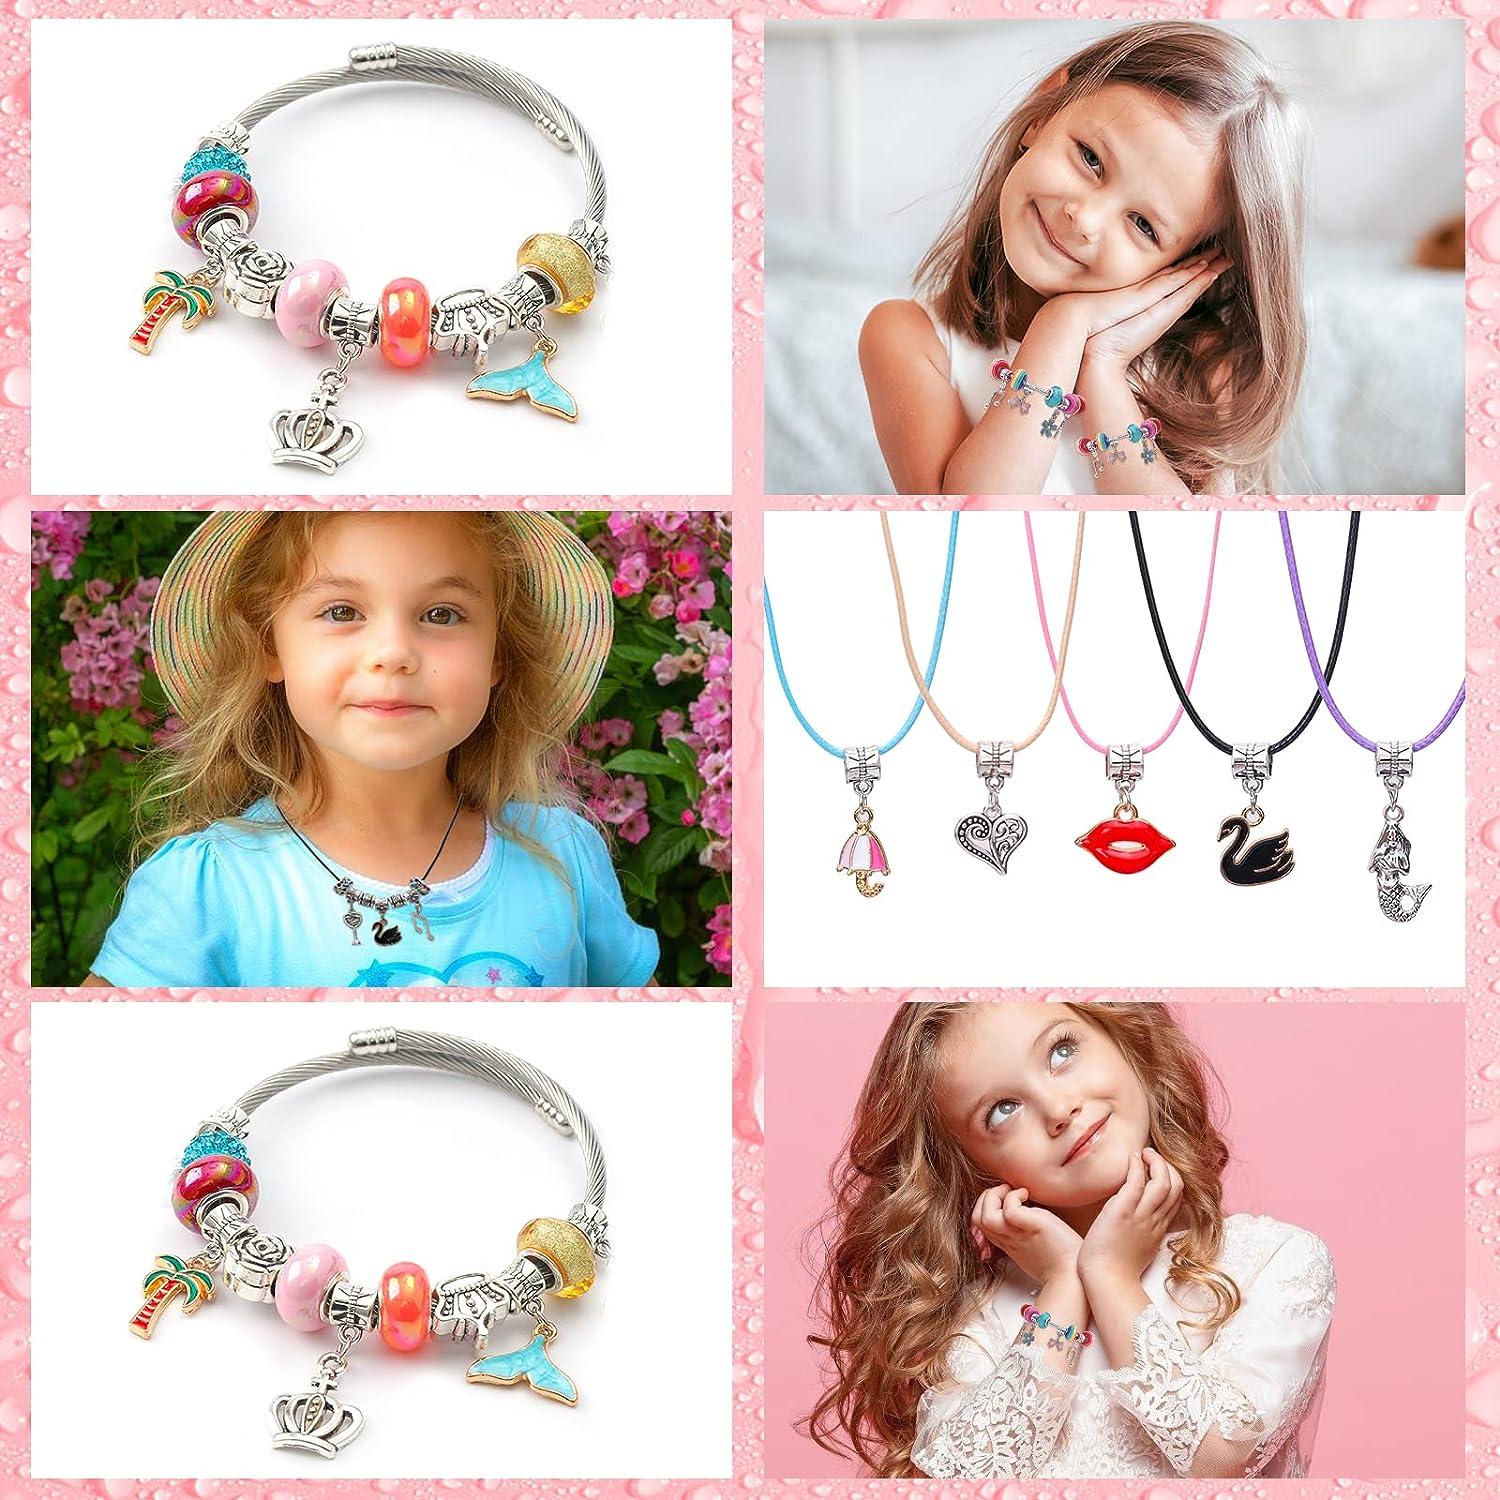 Charm Bracelet Necklaces Jewelry Making Kit, Beads Necklaces Girl